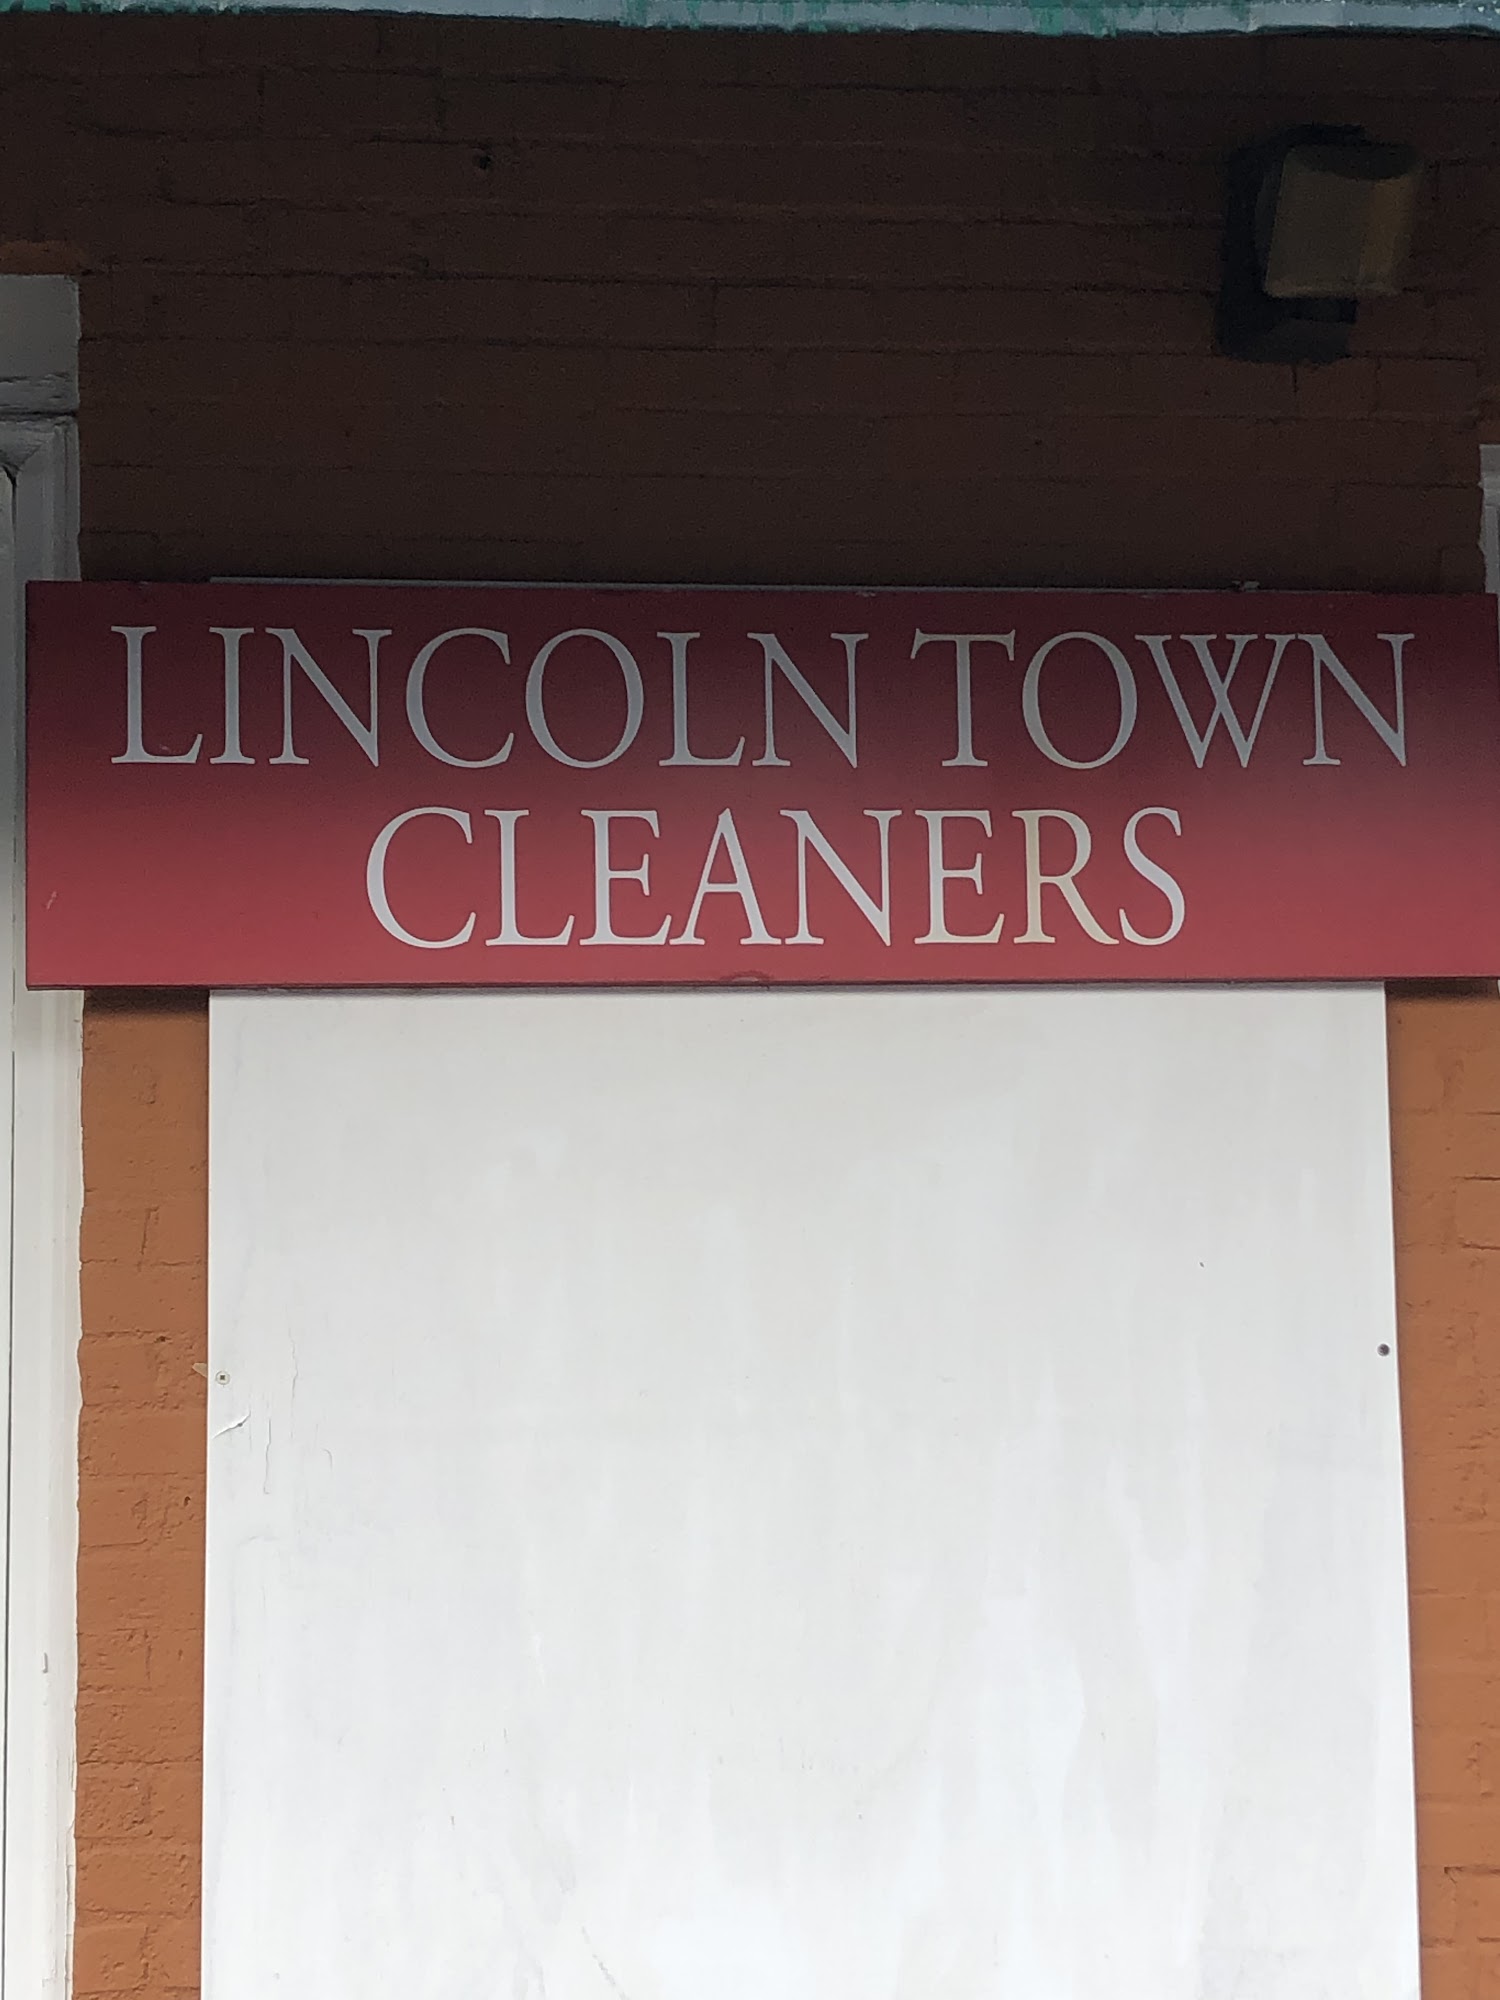 Lincoln Town Cleaners 10 Lewis St, Lincoln Massachusetts 01773